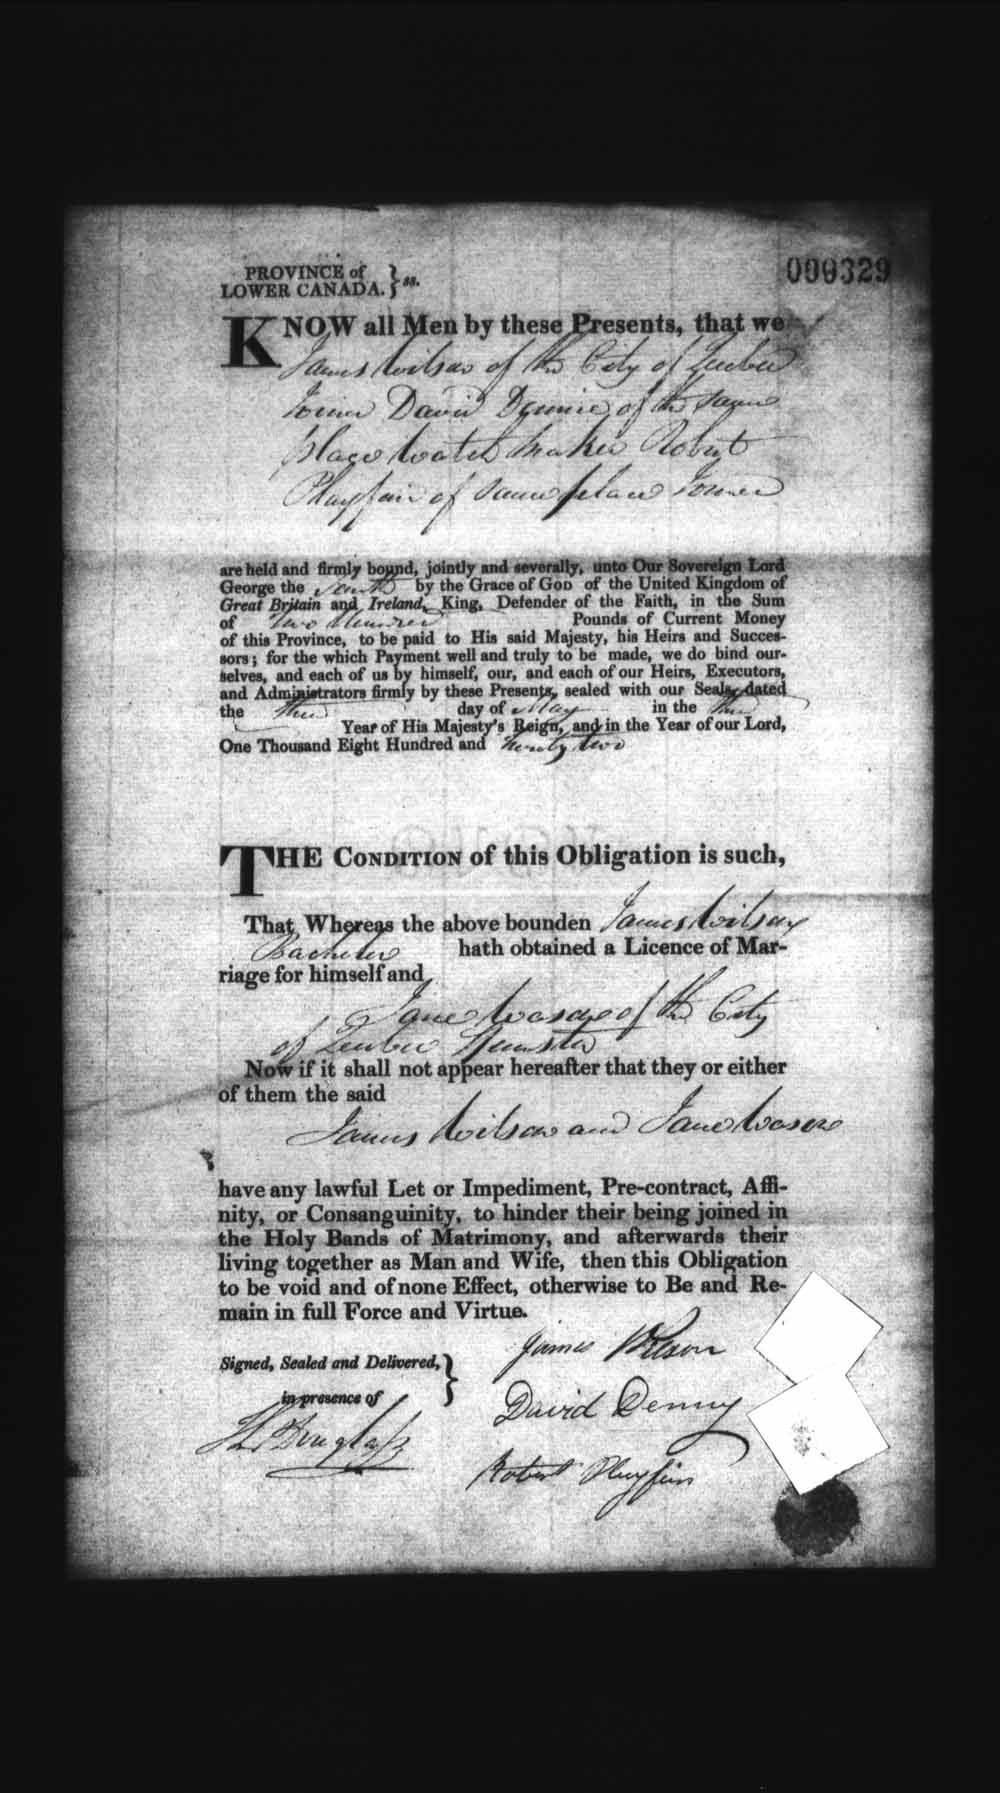 Digitized page of Upper and Lower Canada Marriage Bonds (1779-1865) for Image No.: e008236211